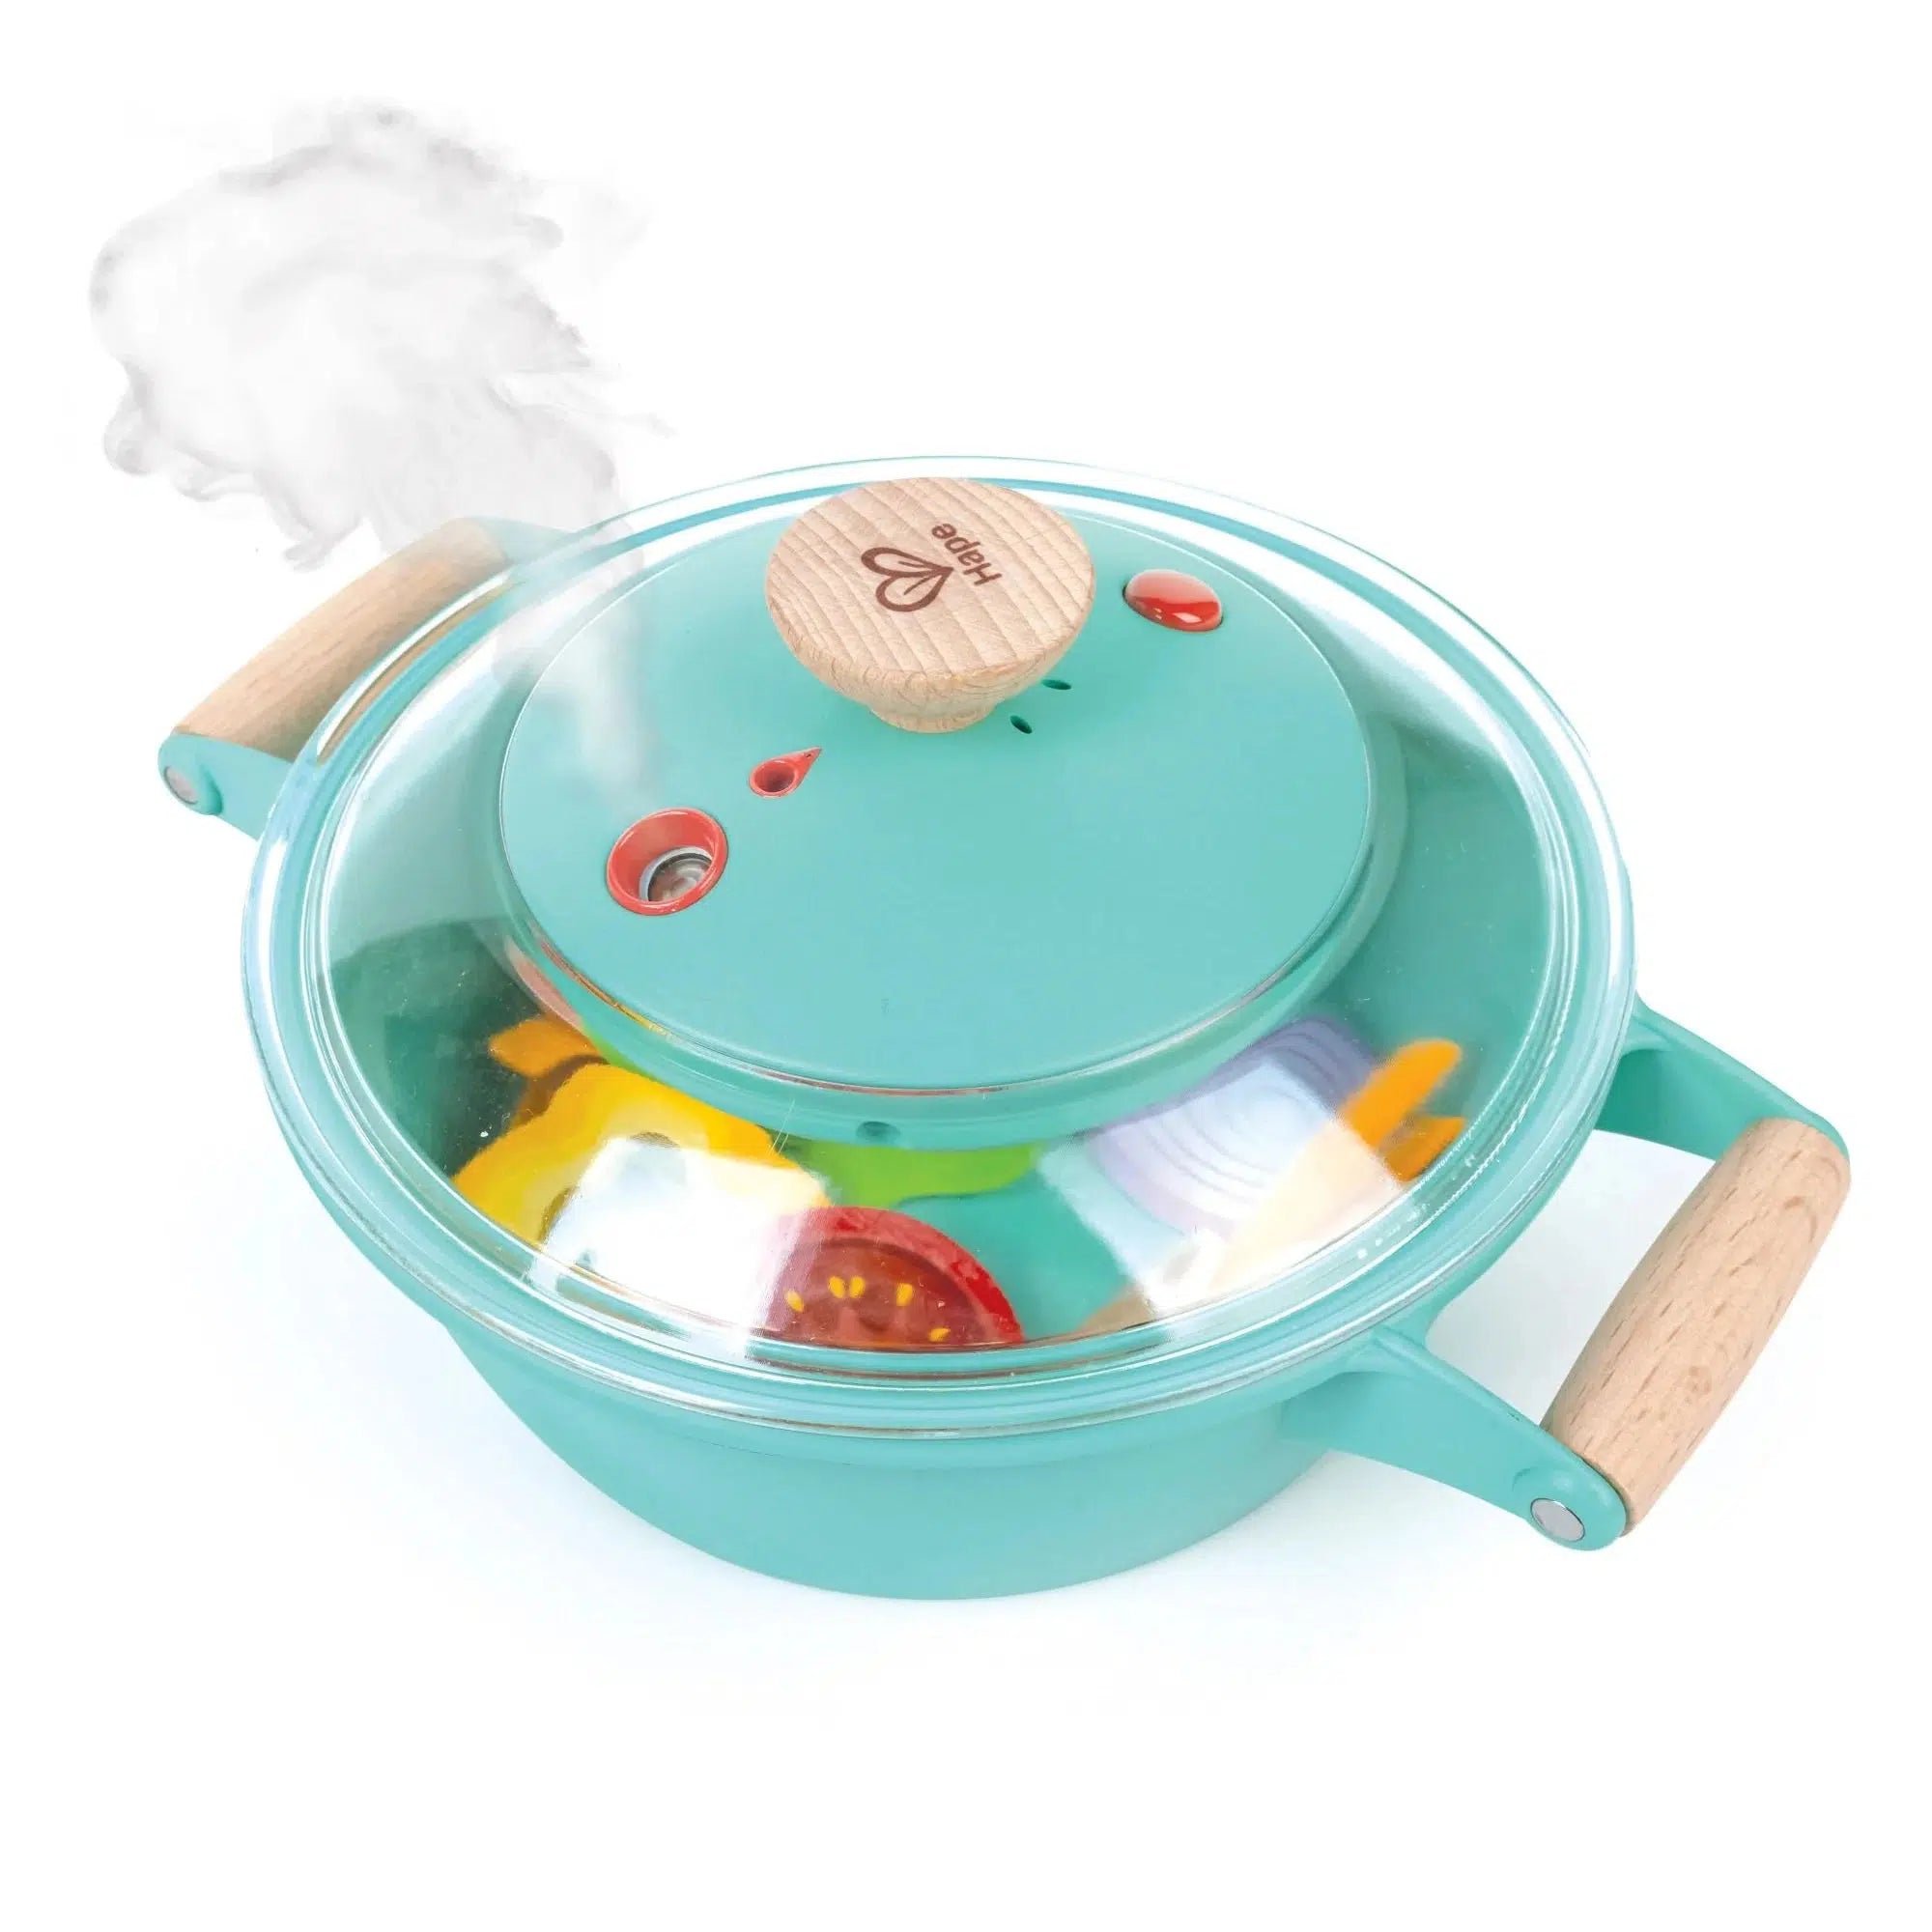 Hape-Little Chef Cooking & Steam Playset-E3187-Legacy Toys